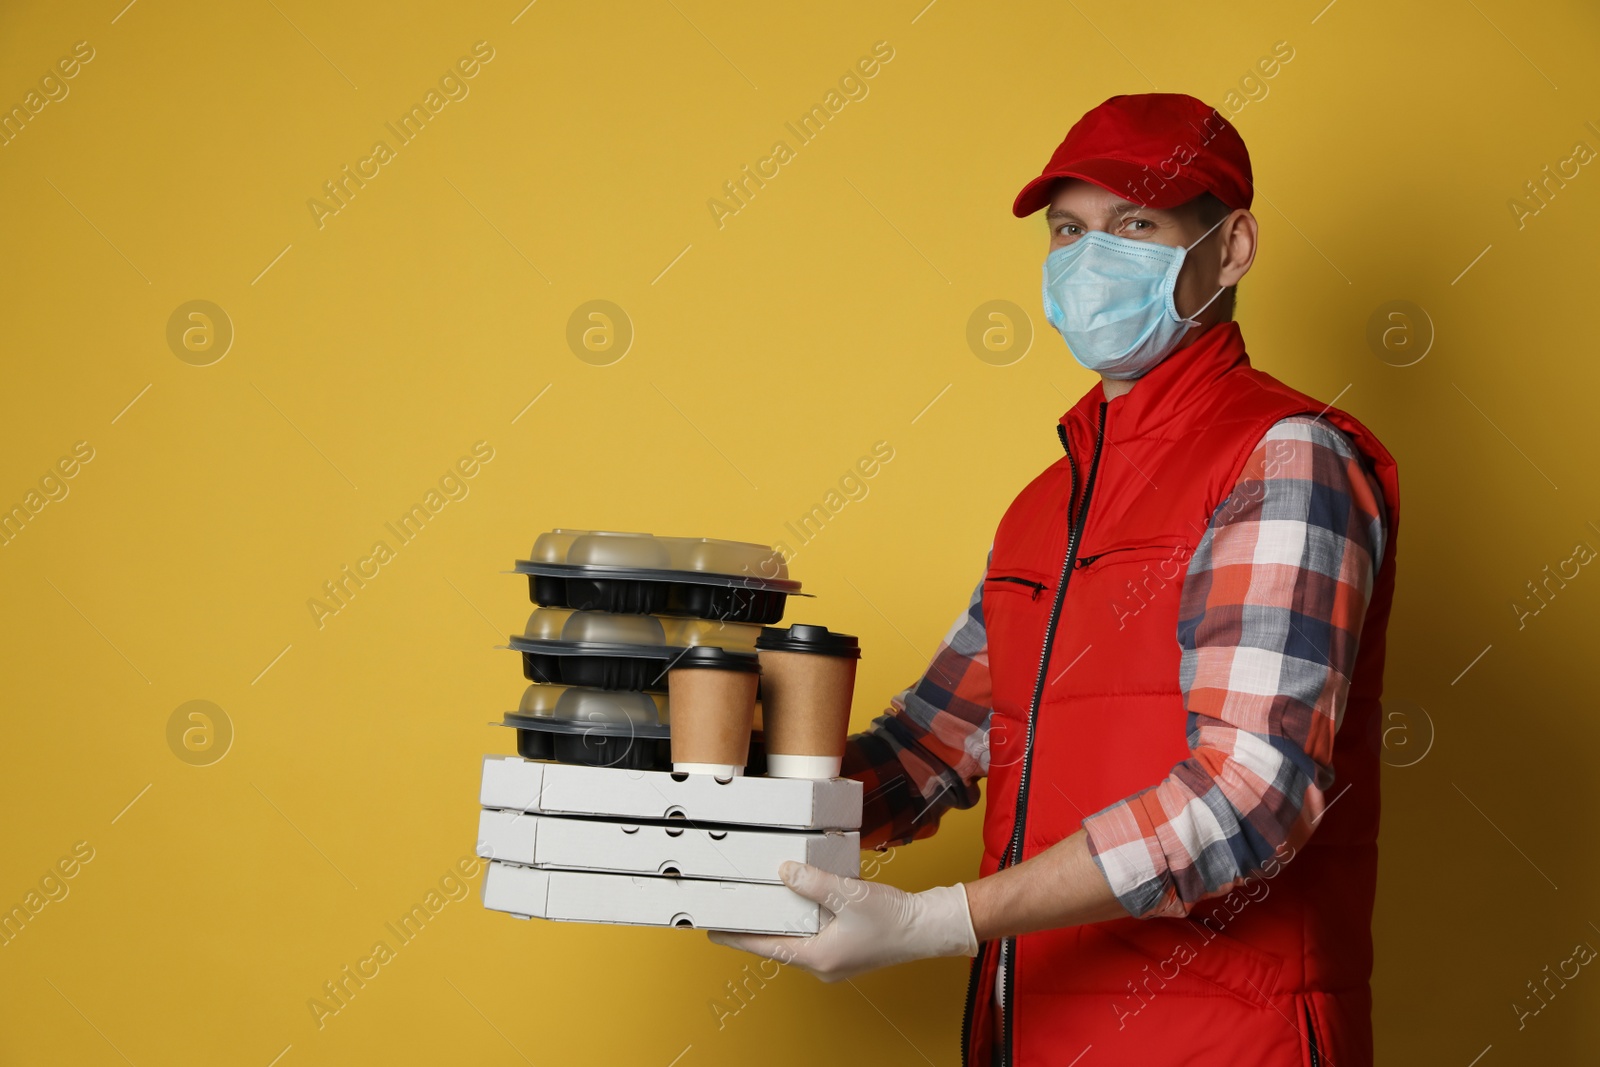 Photo of Courier in protective mask and gloves holding order on yellow background. Food delivery service during coronavirus quarantine